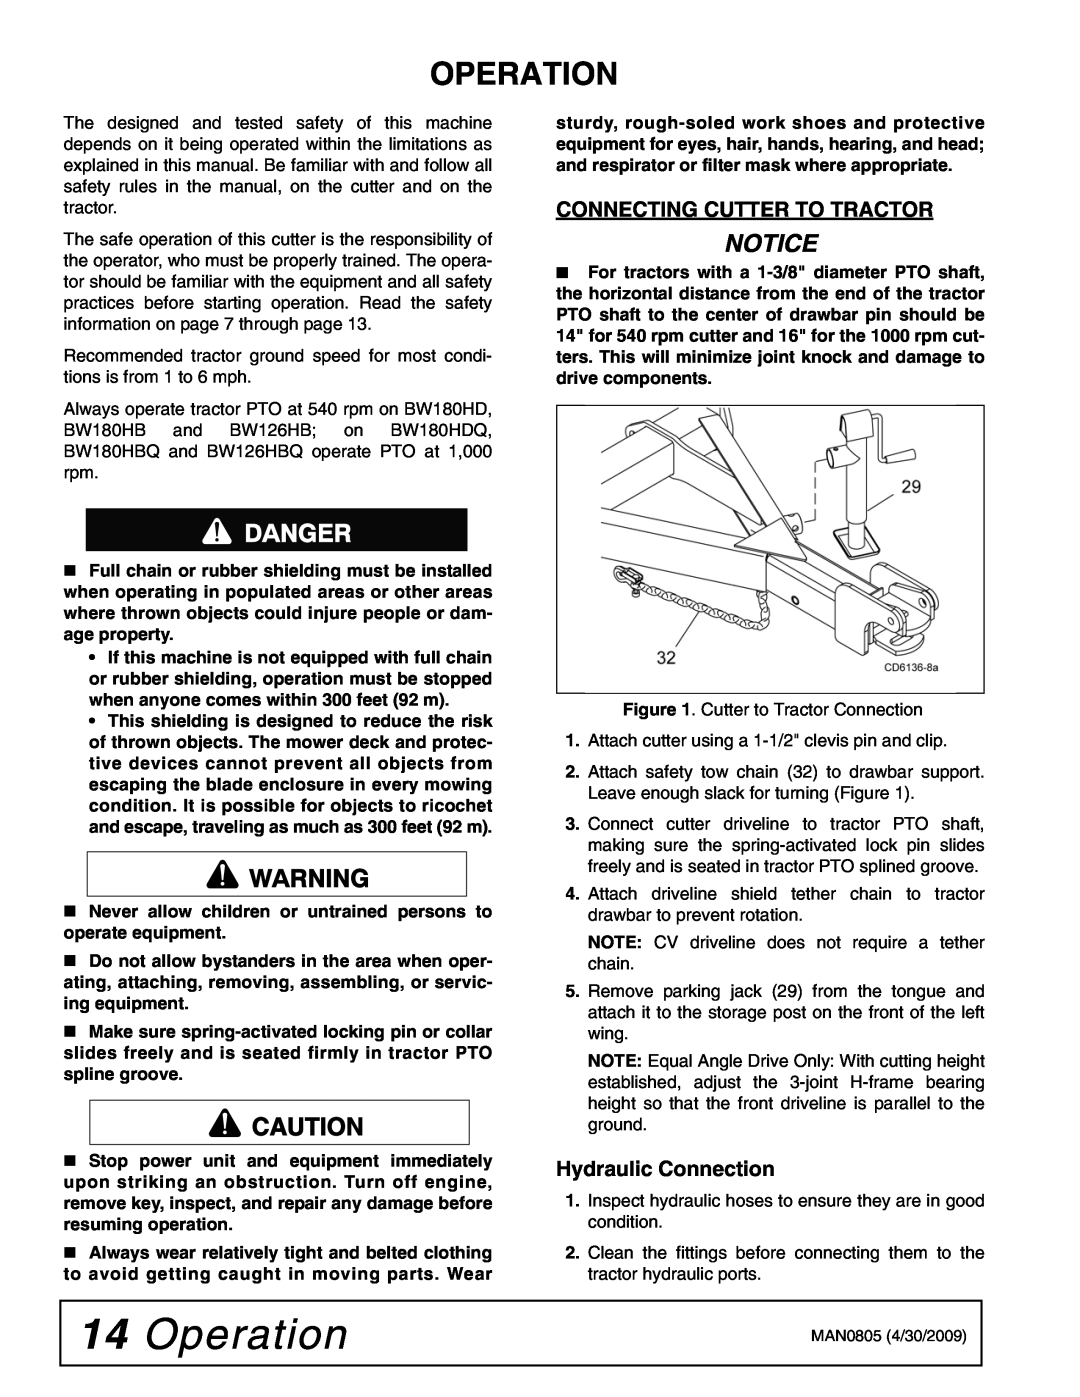 Woods Equipment BW180HDQ, BW180HB manual Operation, Notice, Connecting Cutter To Tractor, Hydraulic Connection 